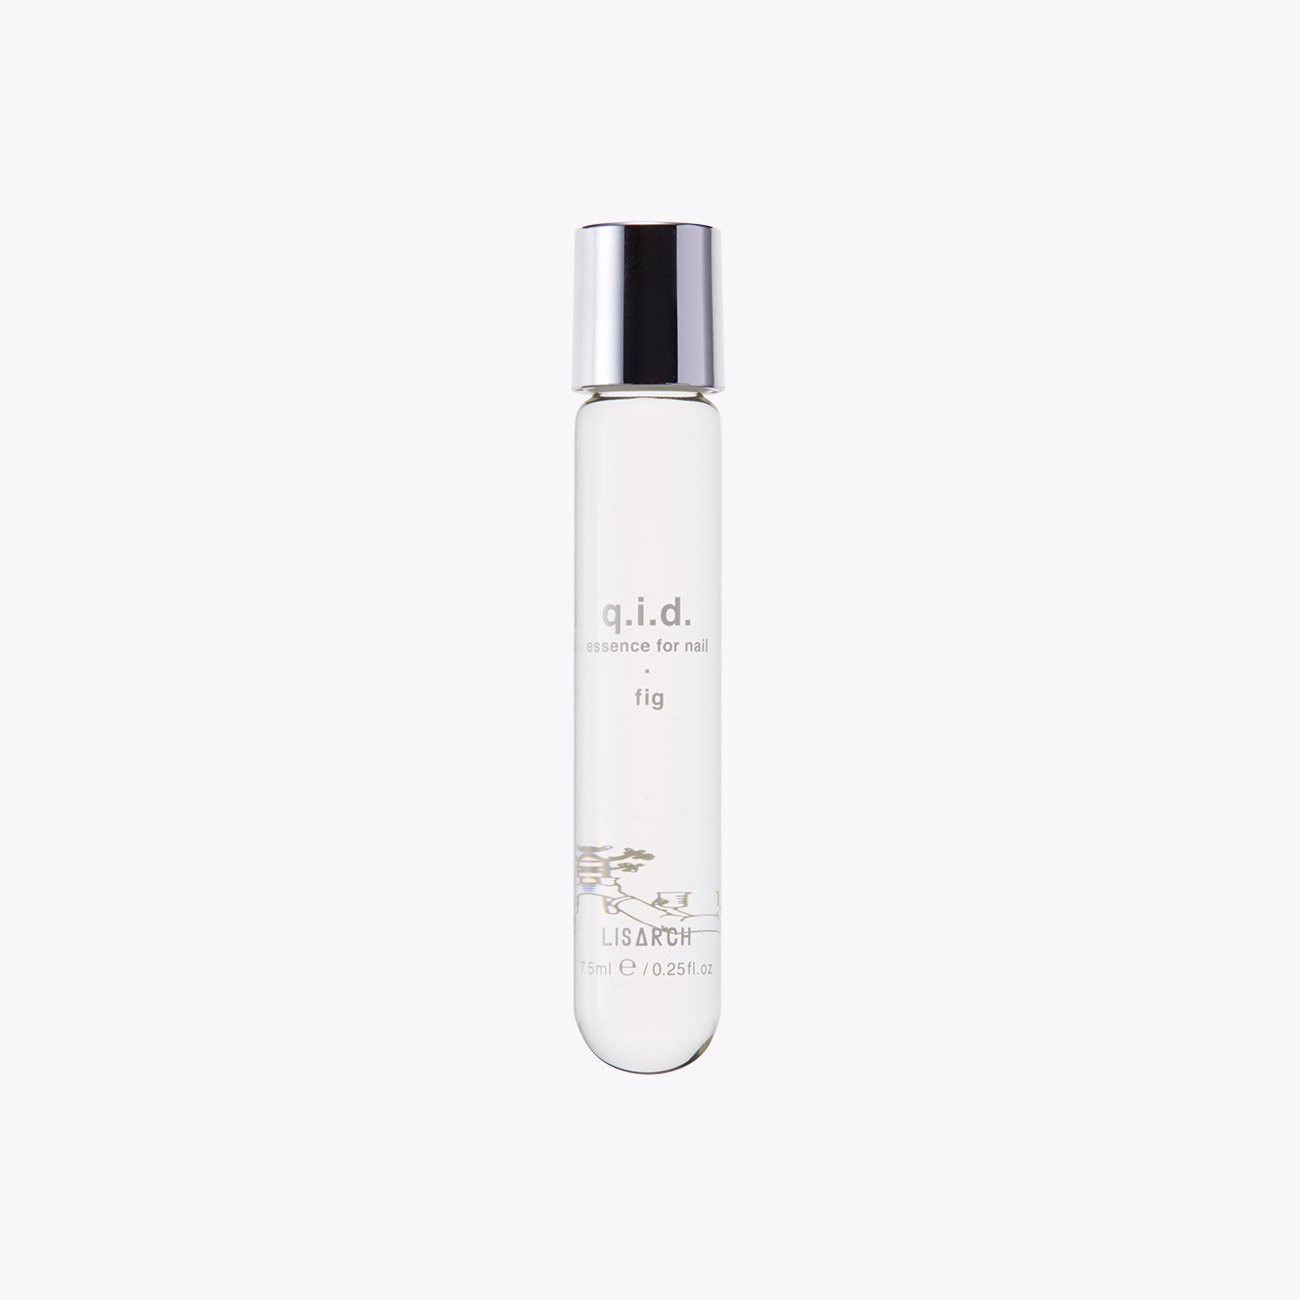 LISARCH  essence for nail fig Zakuro